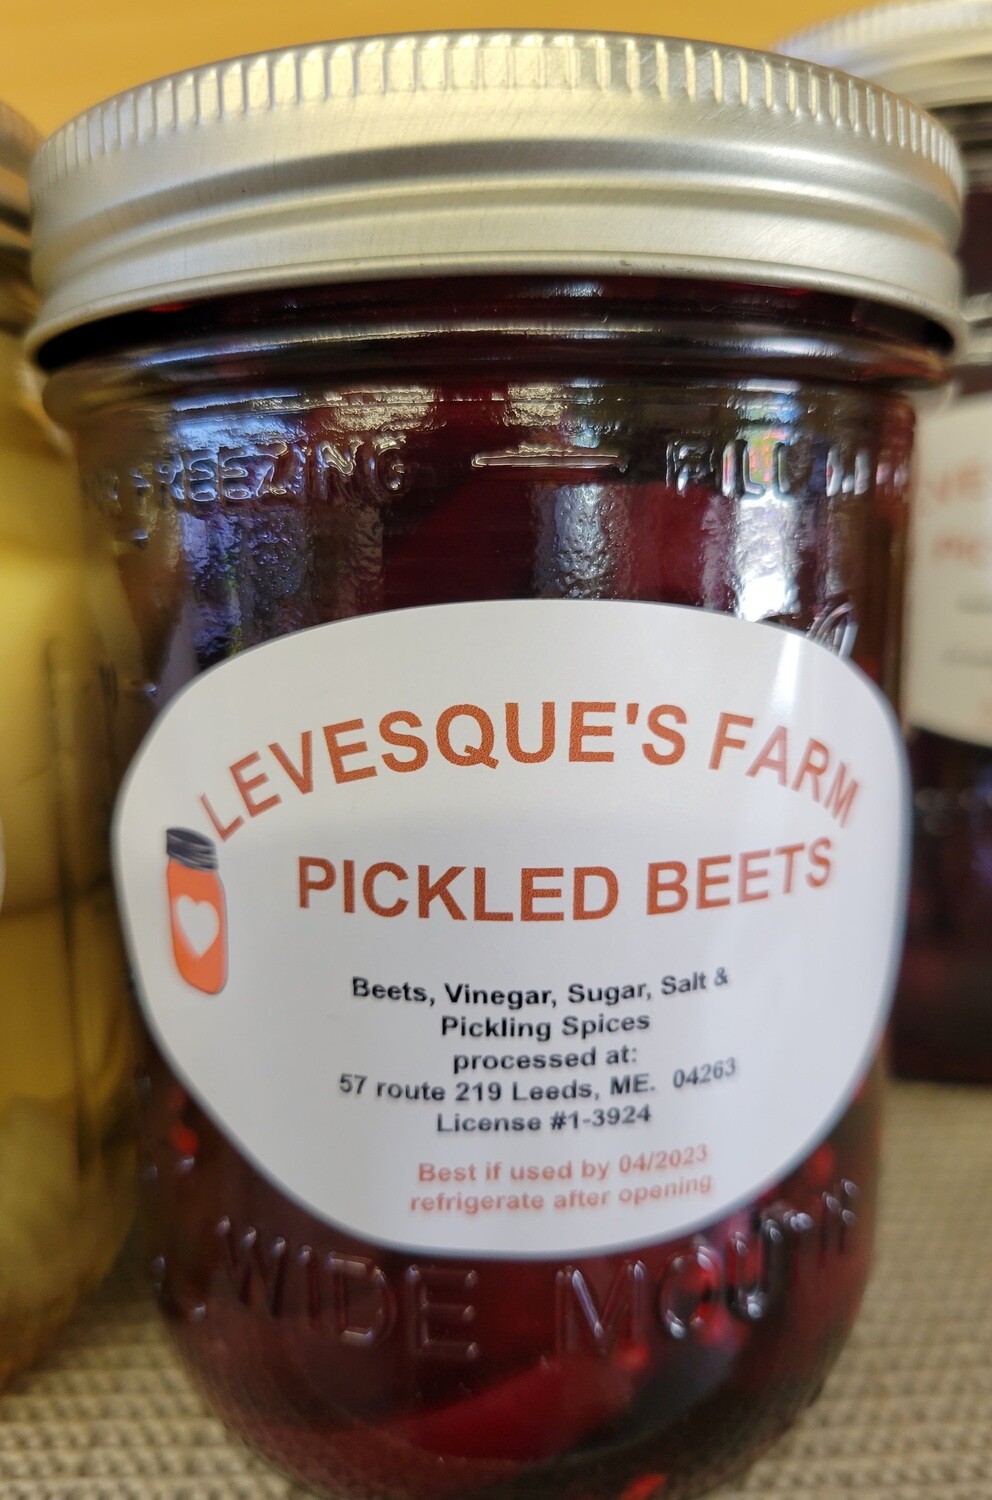 Levesque's Farm - Pickled Beets